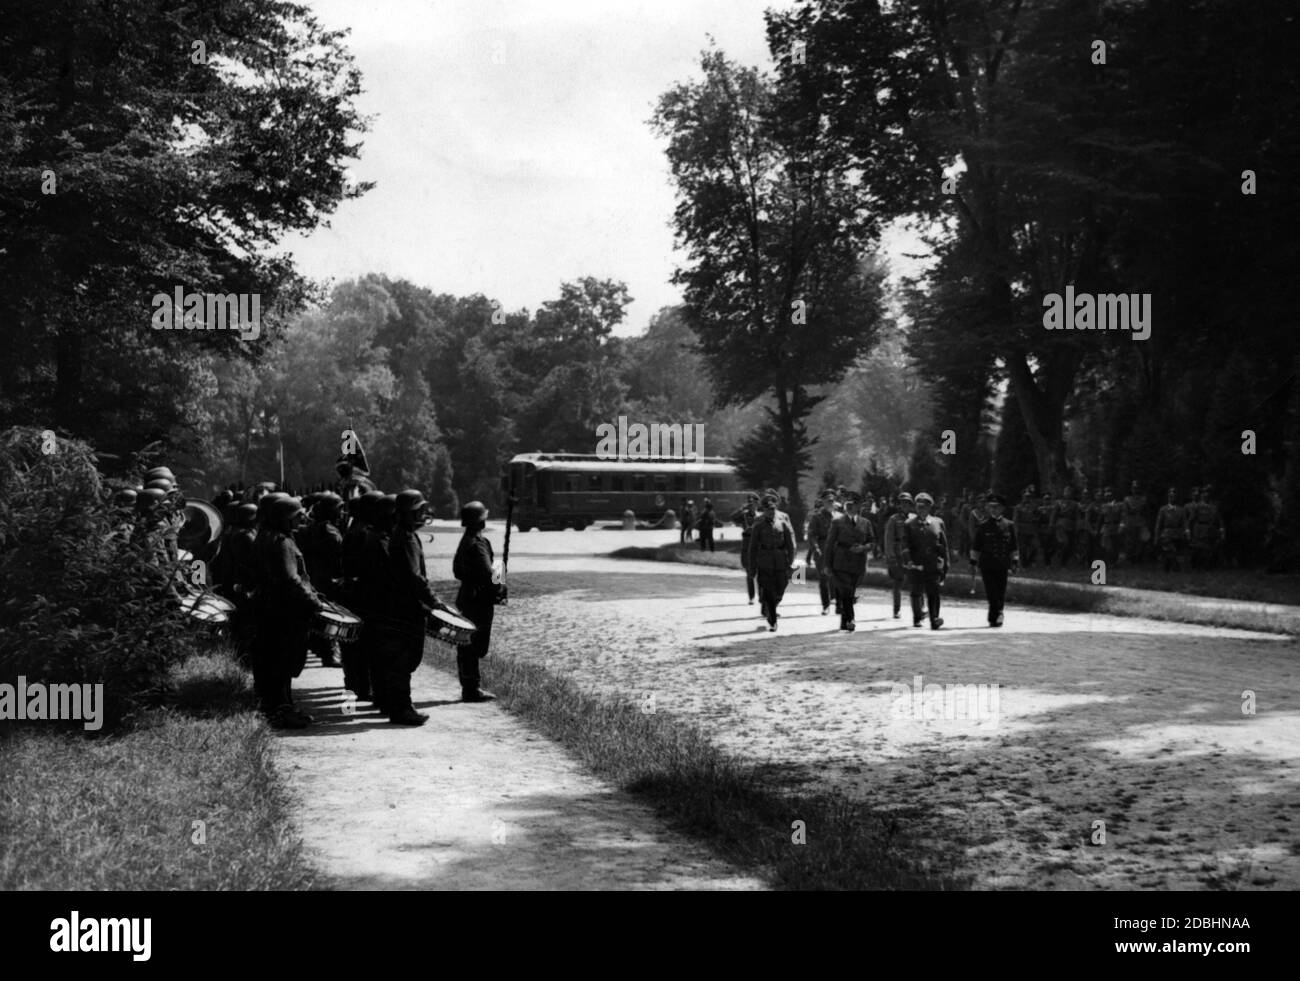 Hitler and his commanders-in-chief of the Luftwaffe and the Navy inspect an honor guard of the Wehrmacht in the forest of Compiegne. In the background, the Compiegne wagon in which was signed the peace treaty in 1918, which was considered disgraceful by the Nazis. The following day, it served Hitler's revenge as a renewed site for the signing of peace terms - this time according to German dictates. Werner von Brauchitsch and Wilhelm Keitel are barely recognizable in the second row. Stock Photo